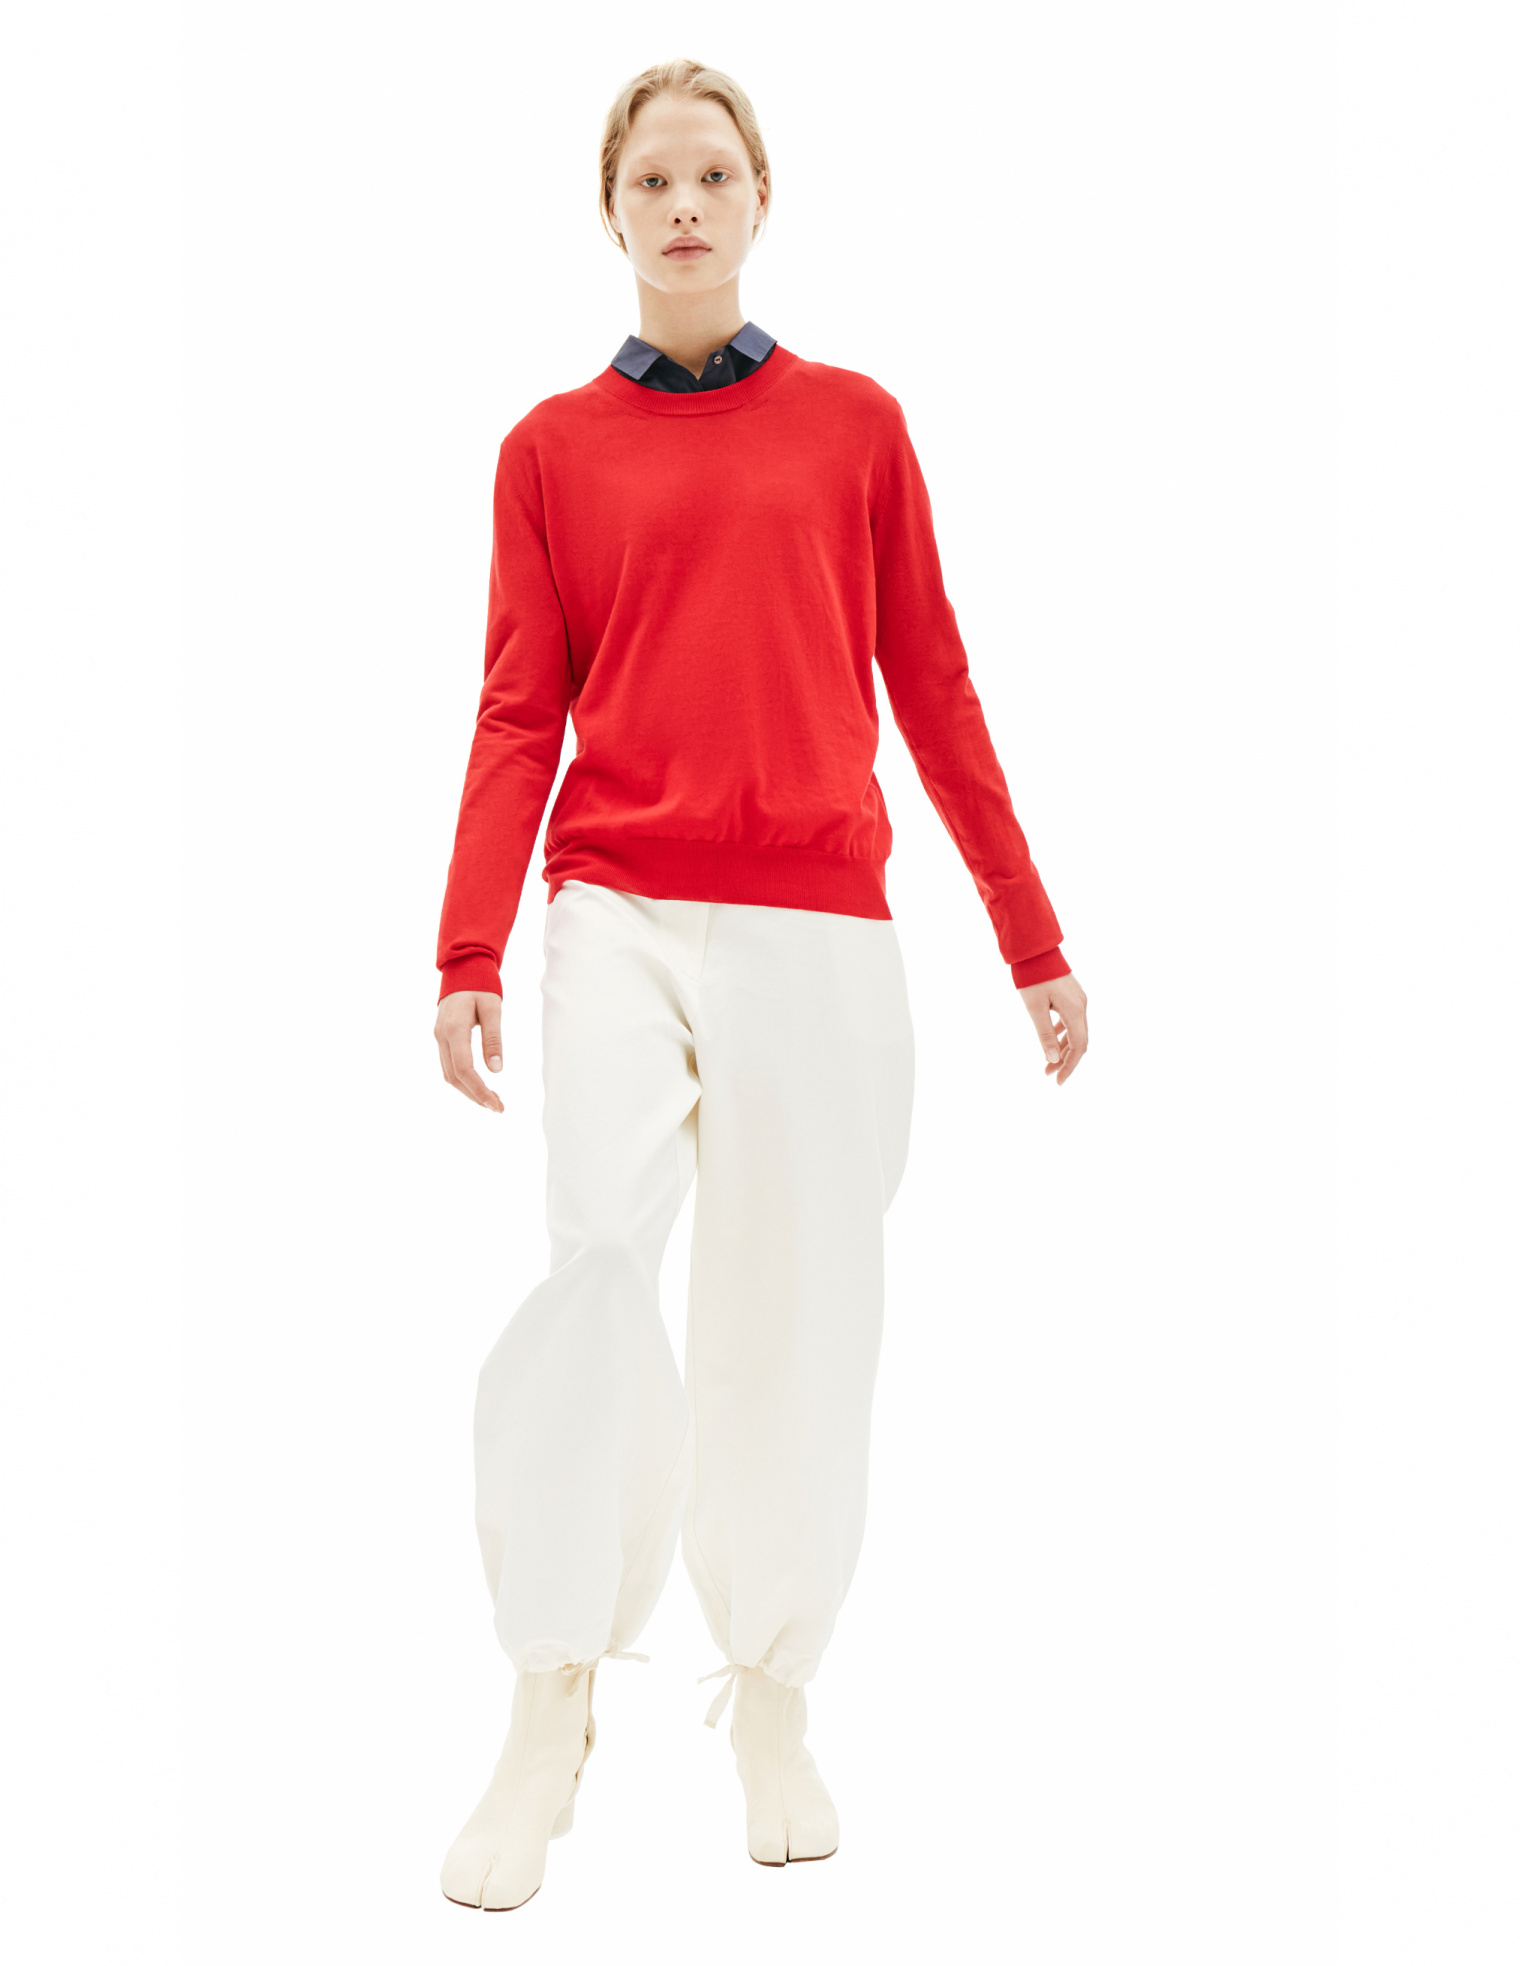 Maison Margiela Red Cotton Inside Out Sweater